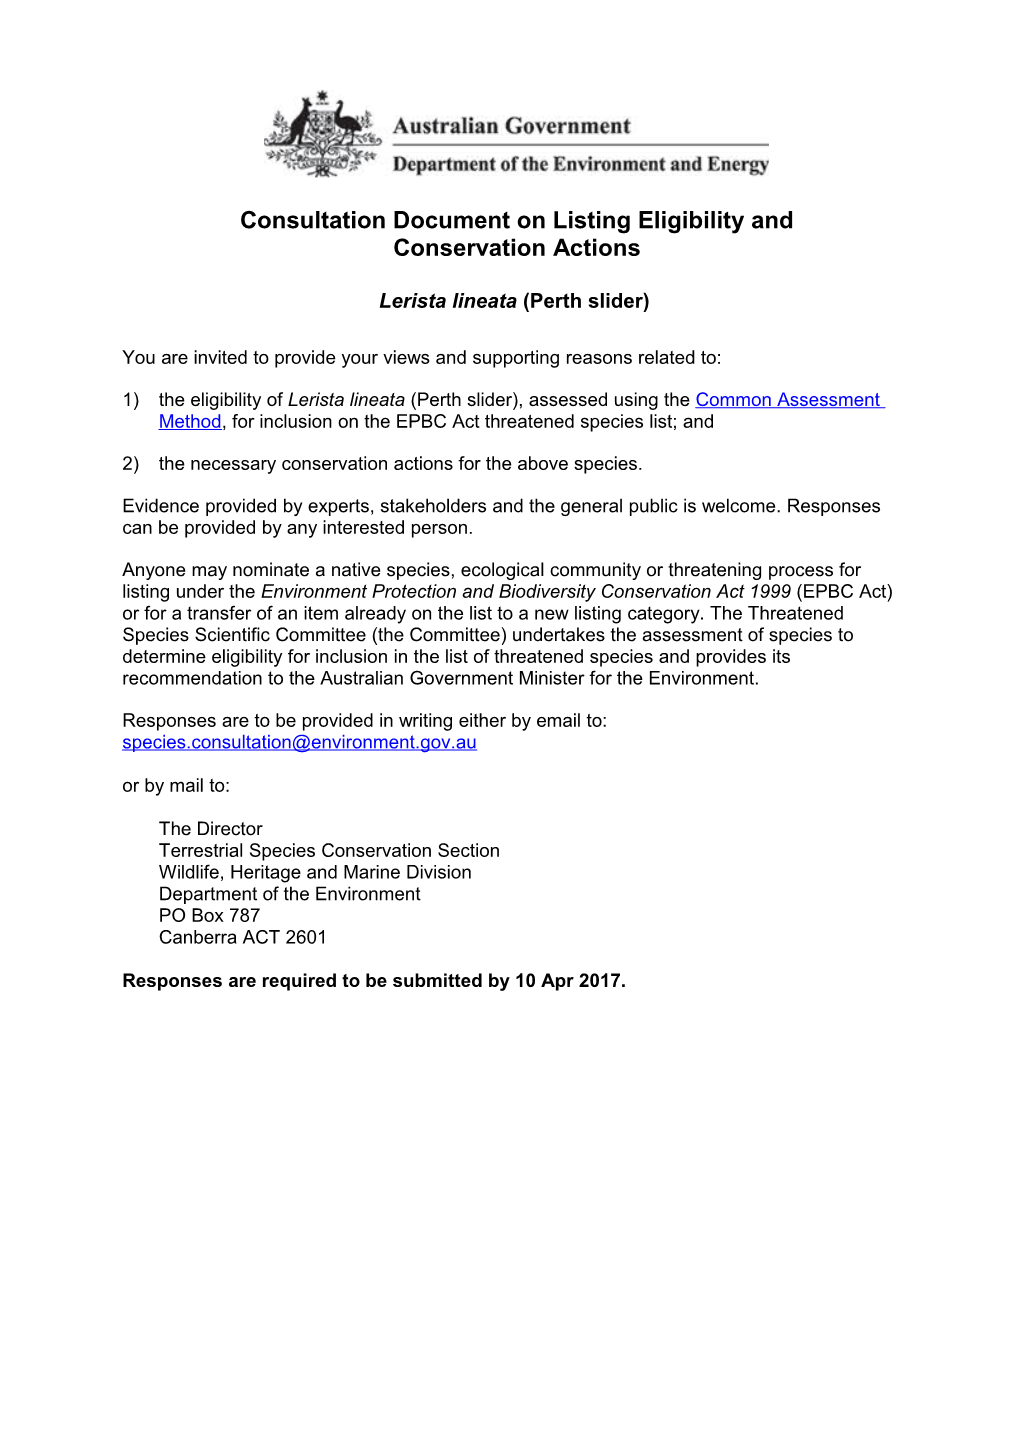 Consultation Document on Listing Eligiblity and Conservation Actions - Lerista Lineate